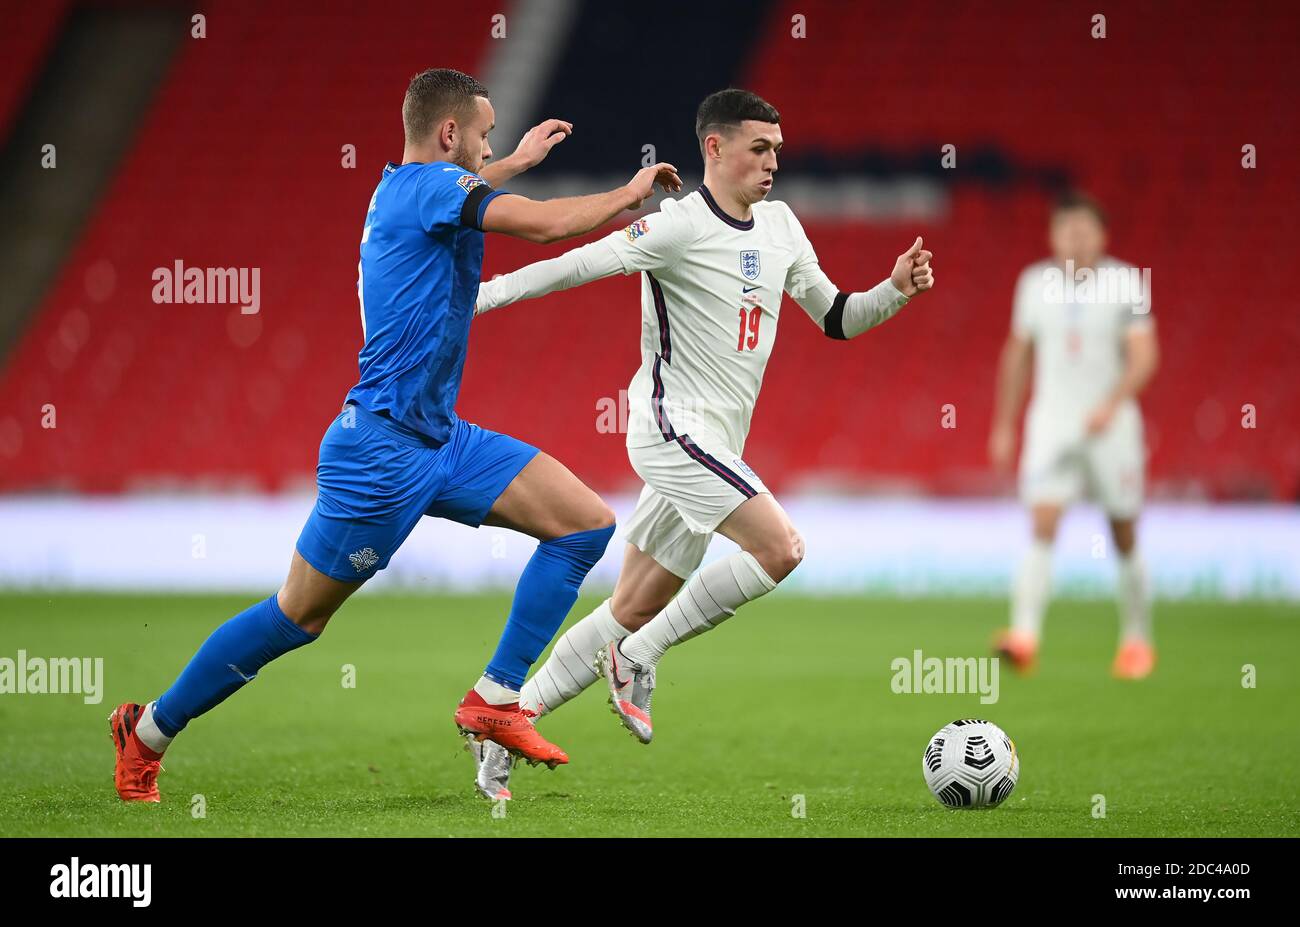 Iceland's Sverrir Ingason (left) and England's Phil Foden in action during the UEFA Nations League match at Wembley Stadium, London. Stock Photo